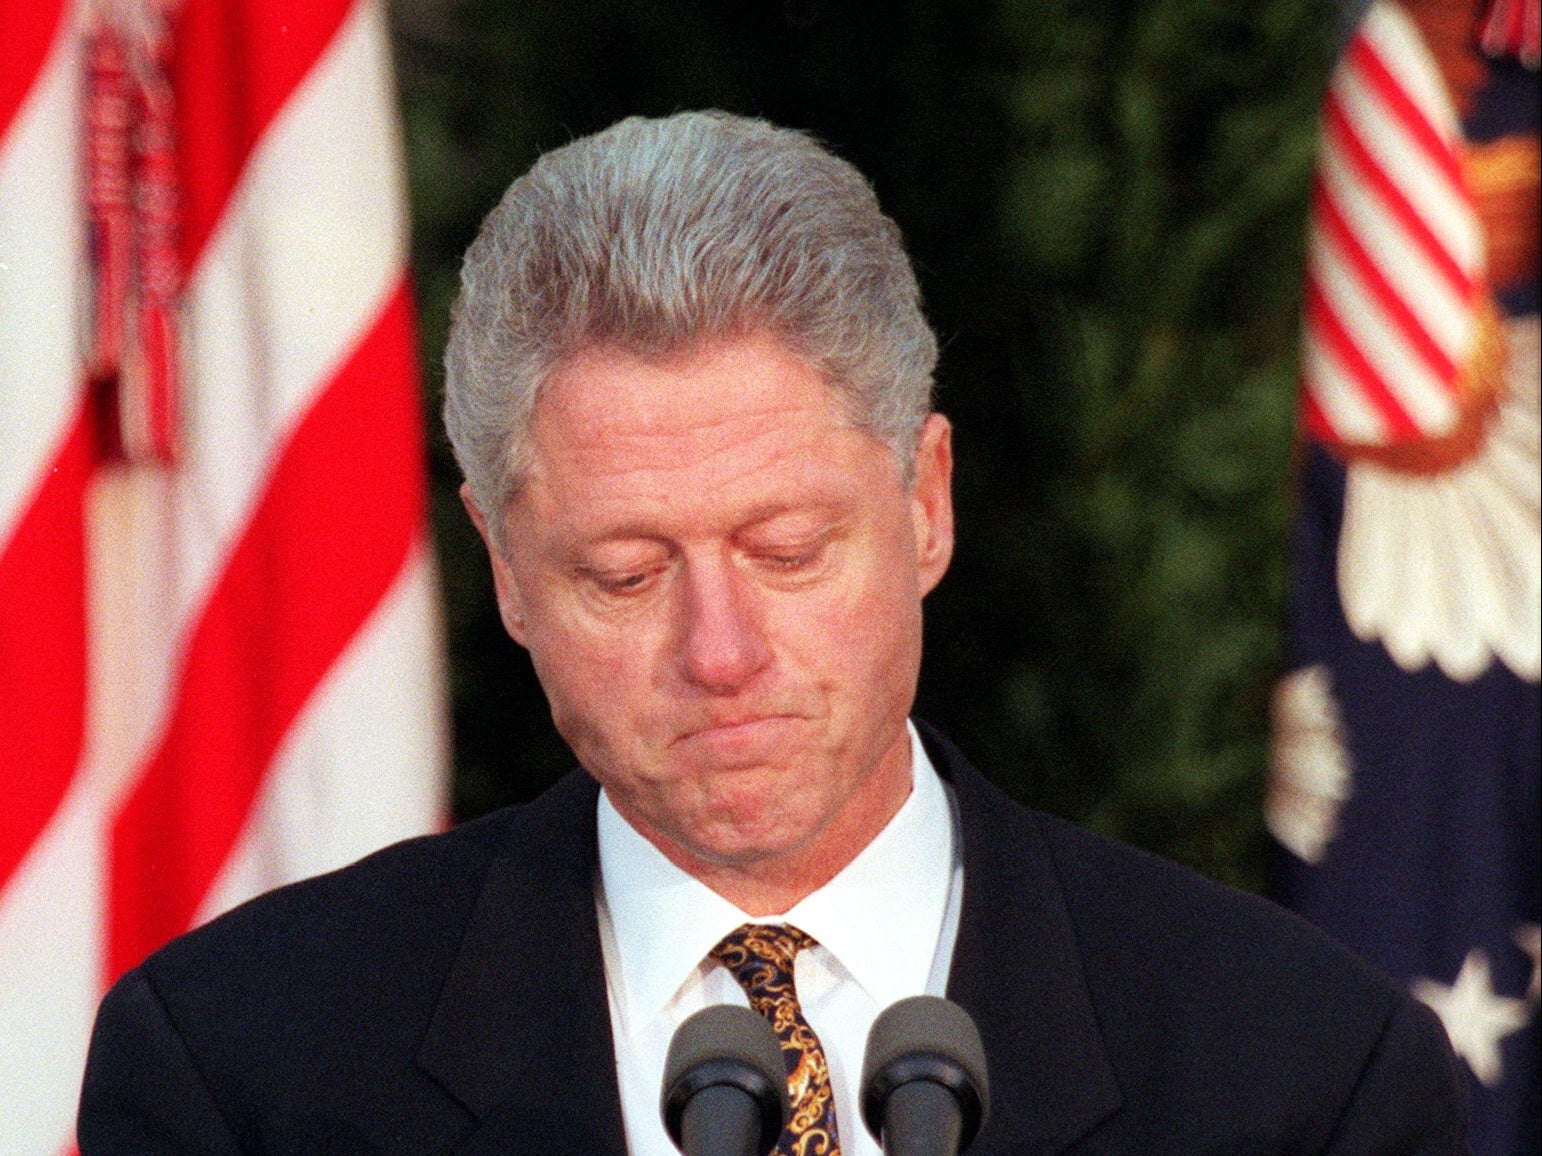 Bill Clinton apologises to the nation from the Rose Garden of the White House on 11 December 1998 in Washington, DC